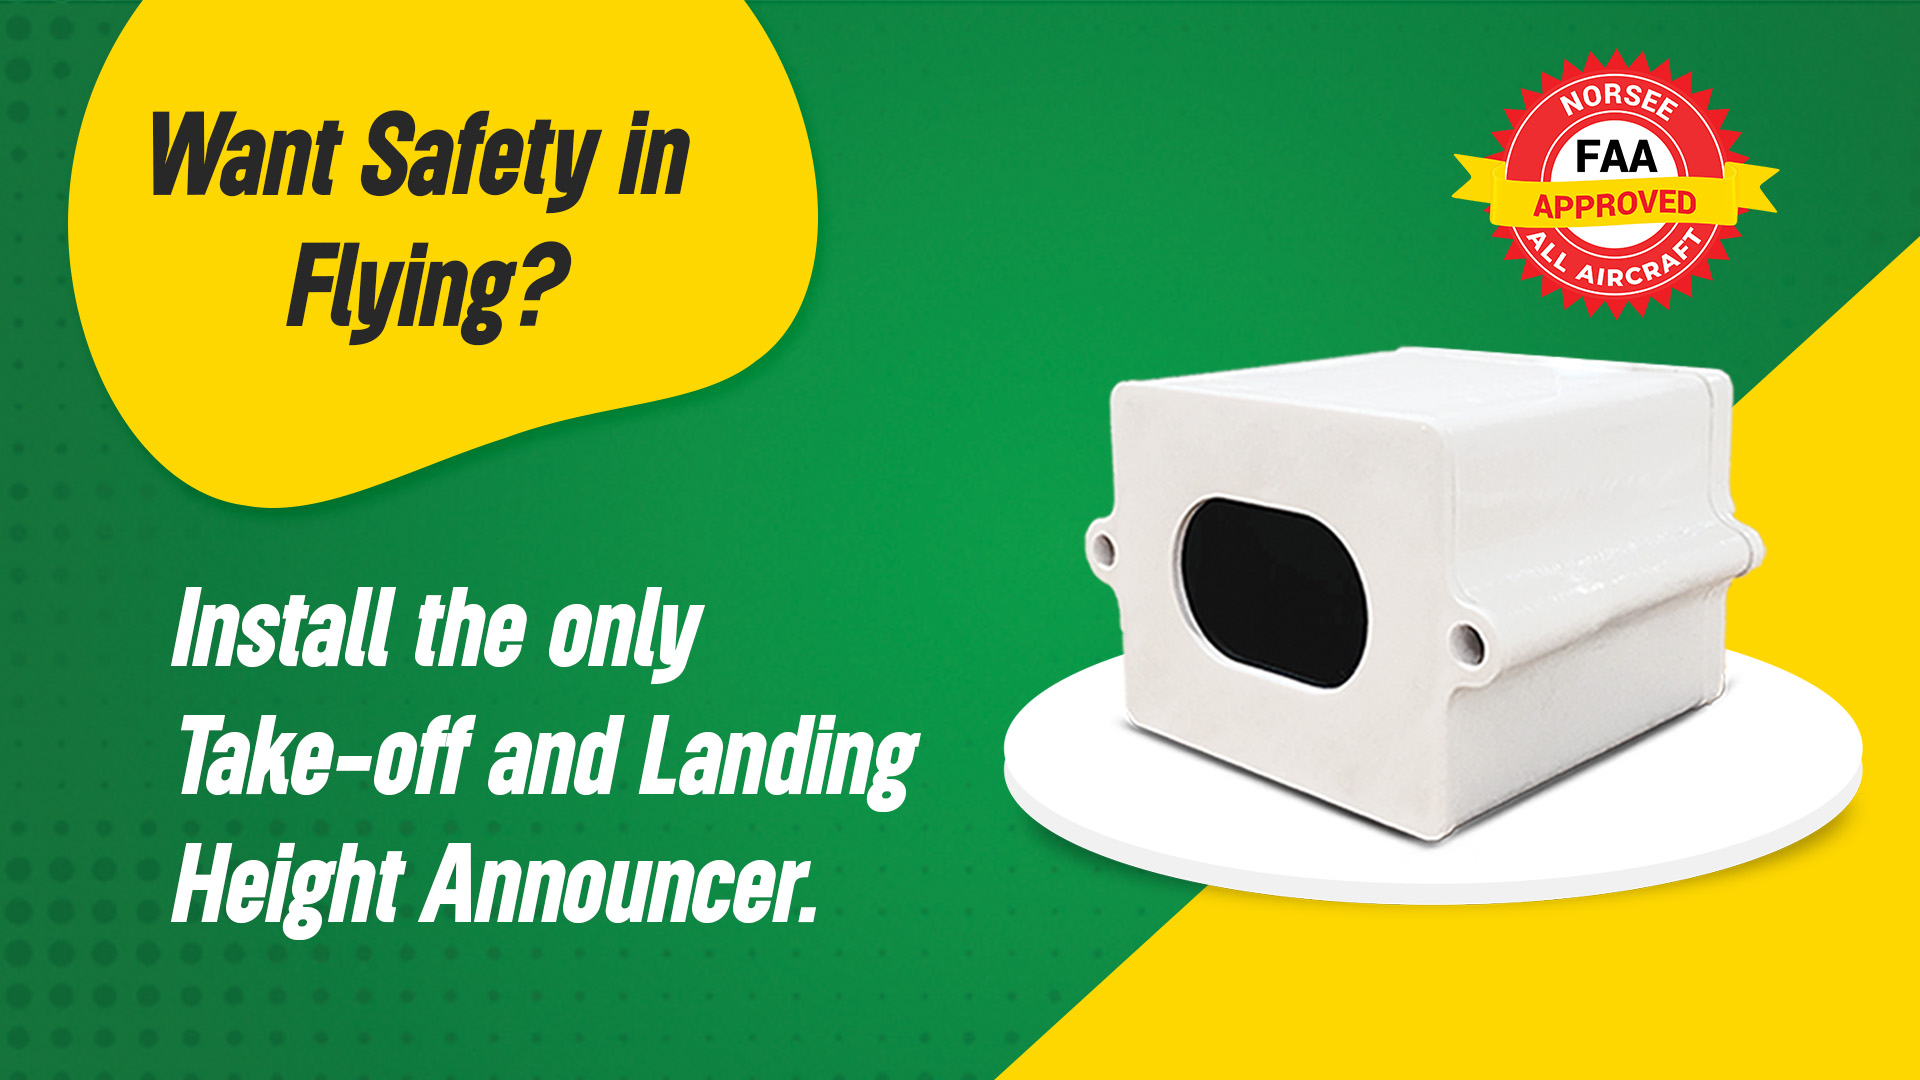 Want safety in flying? Install the only Take-off and Landing Height Announcer.